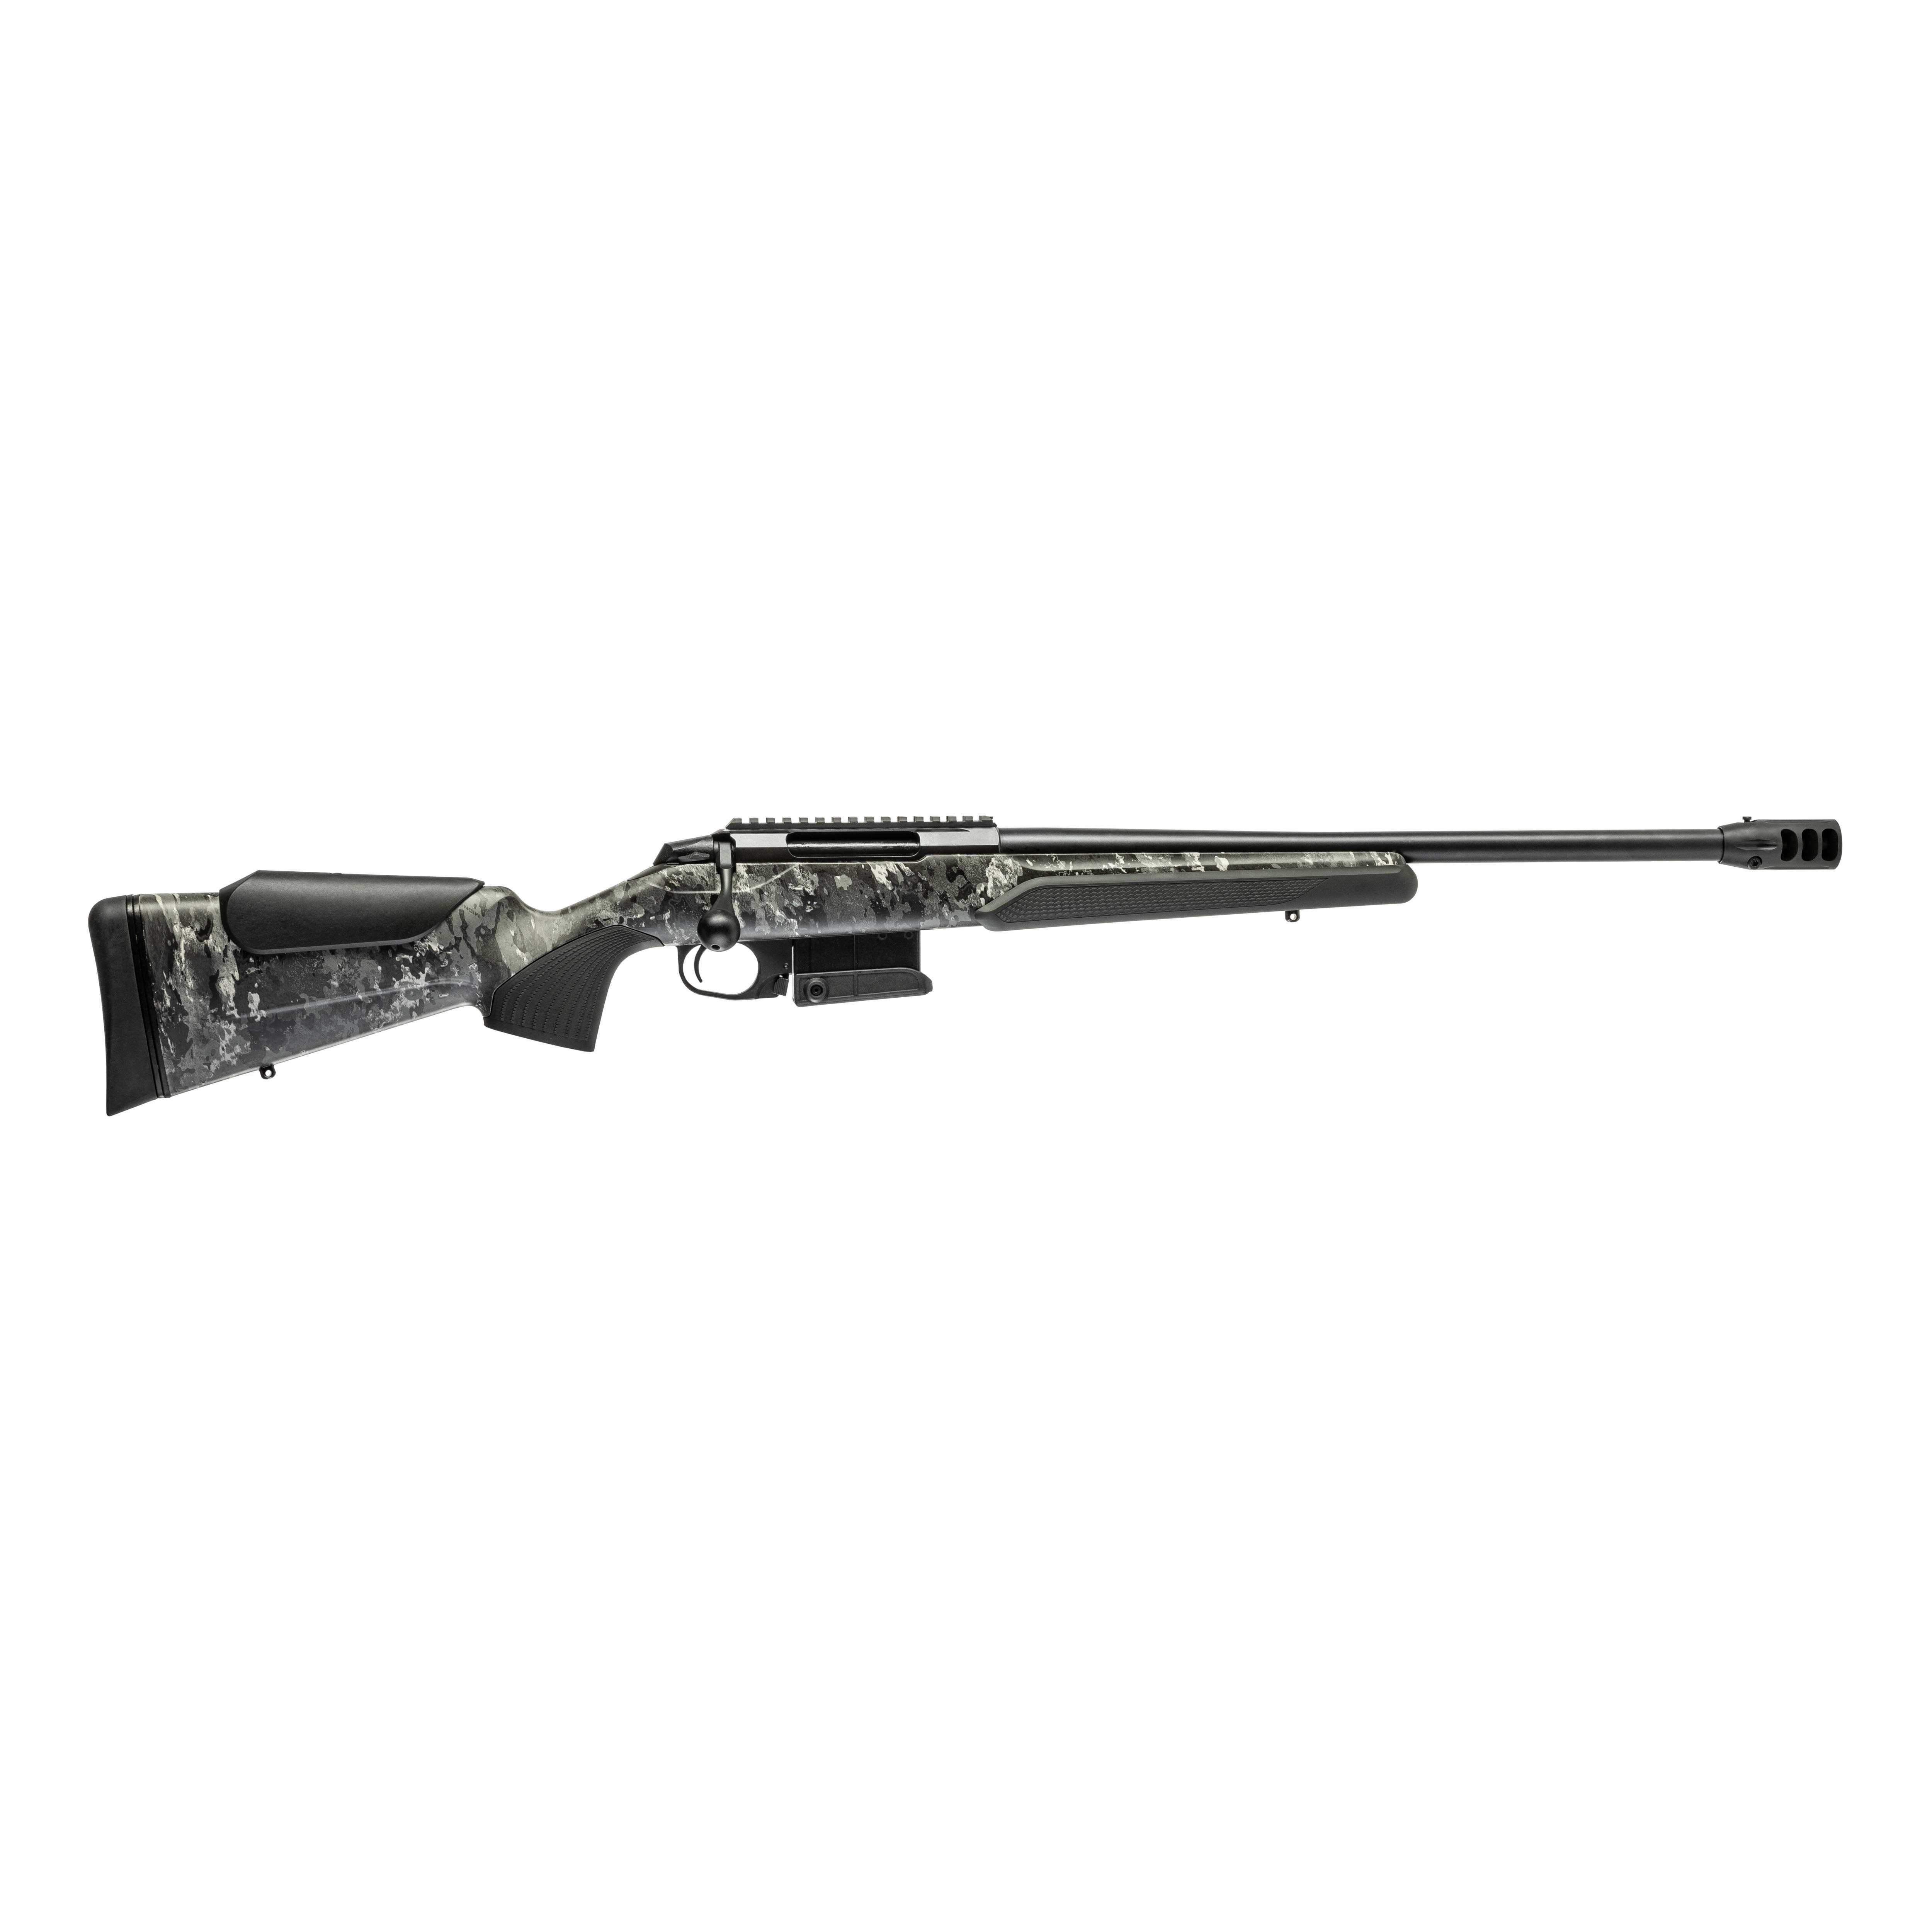 Special Edition Tikka T3x Compact Tactical Rifle in TrueTimber Midnight